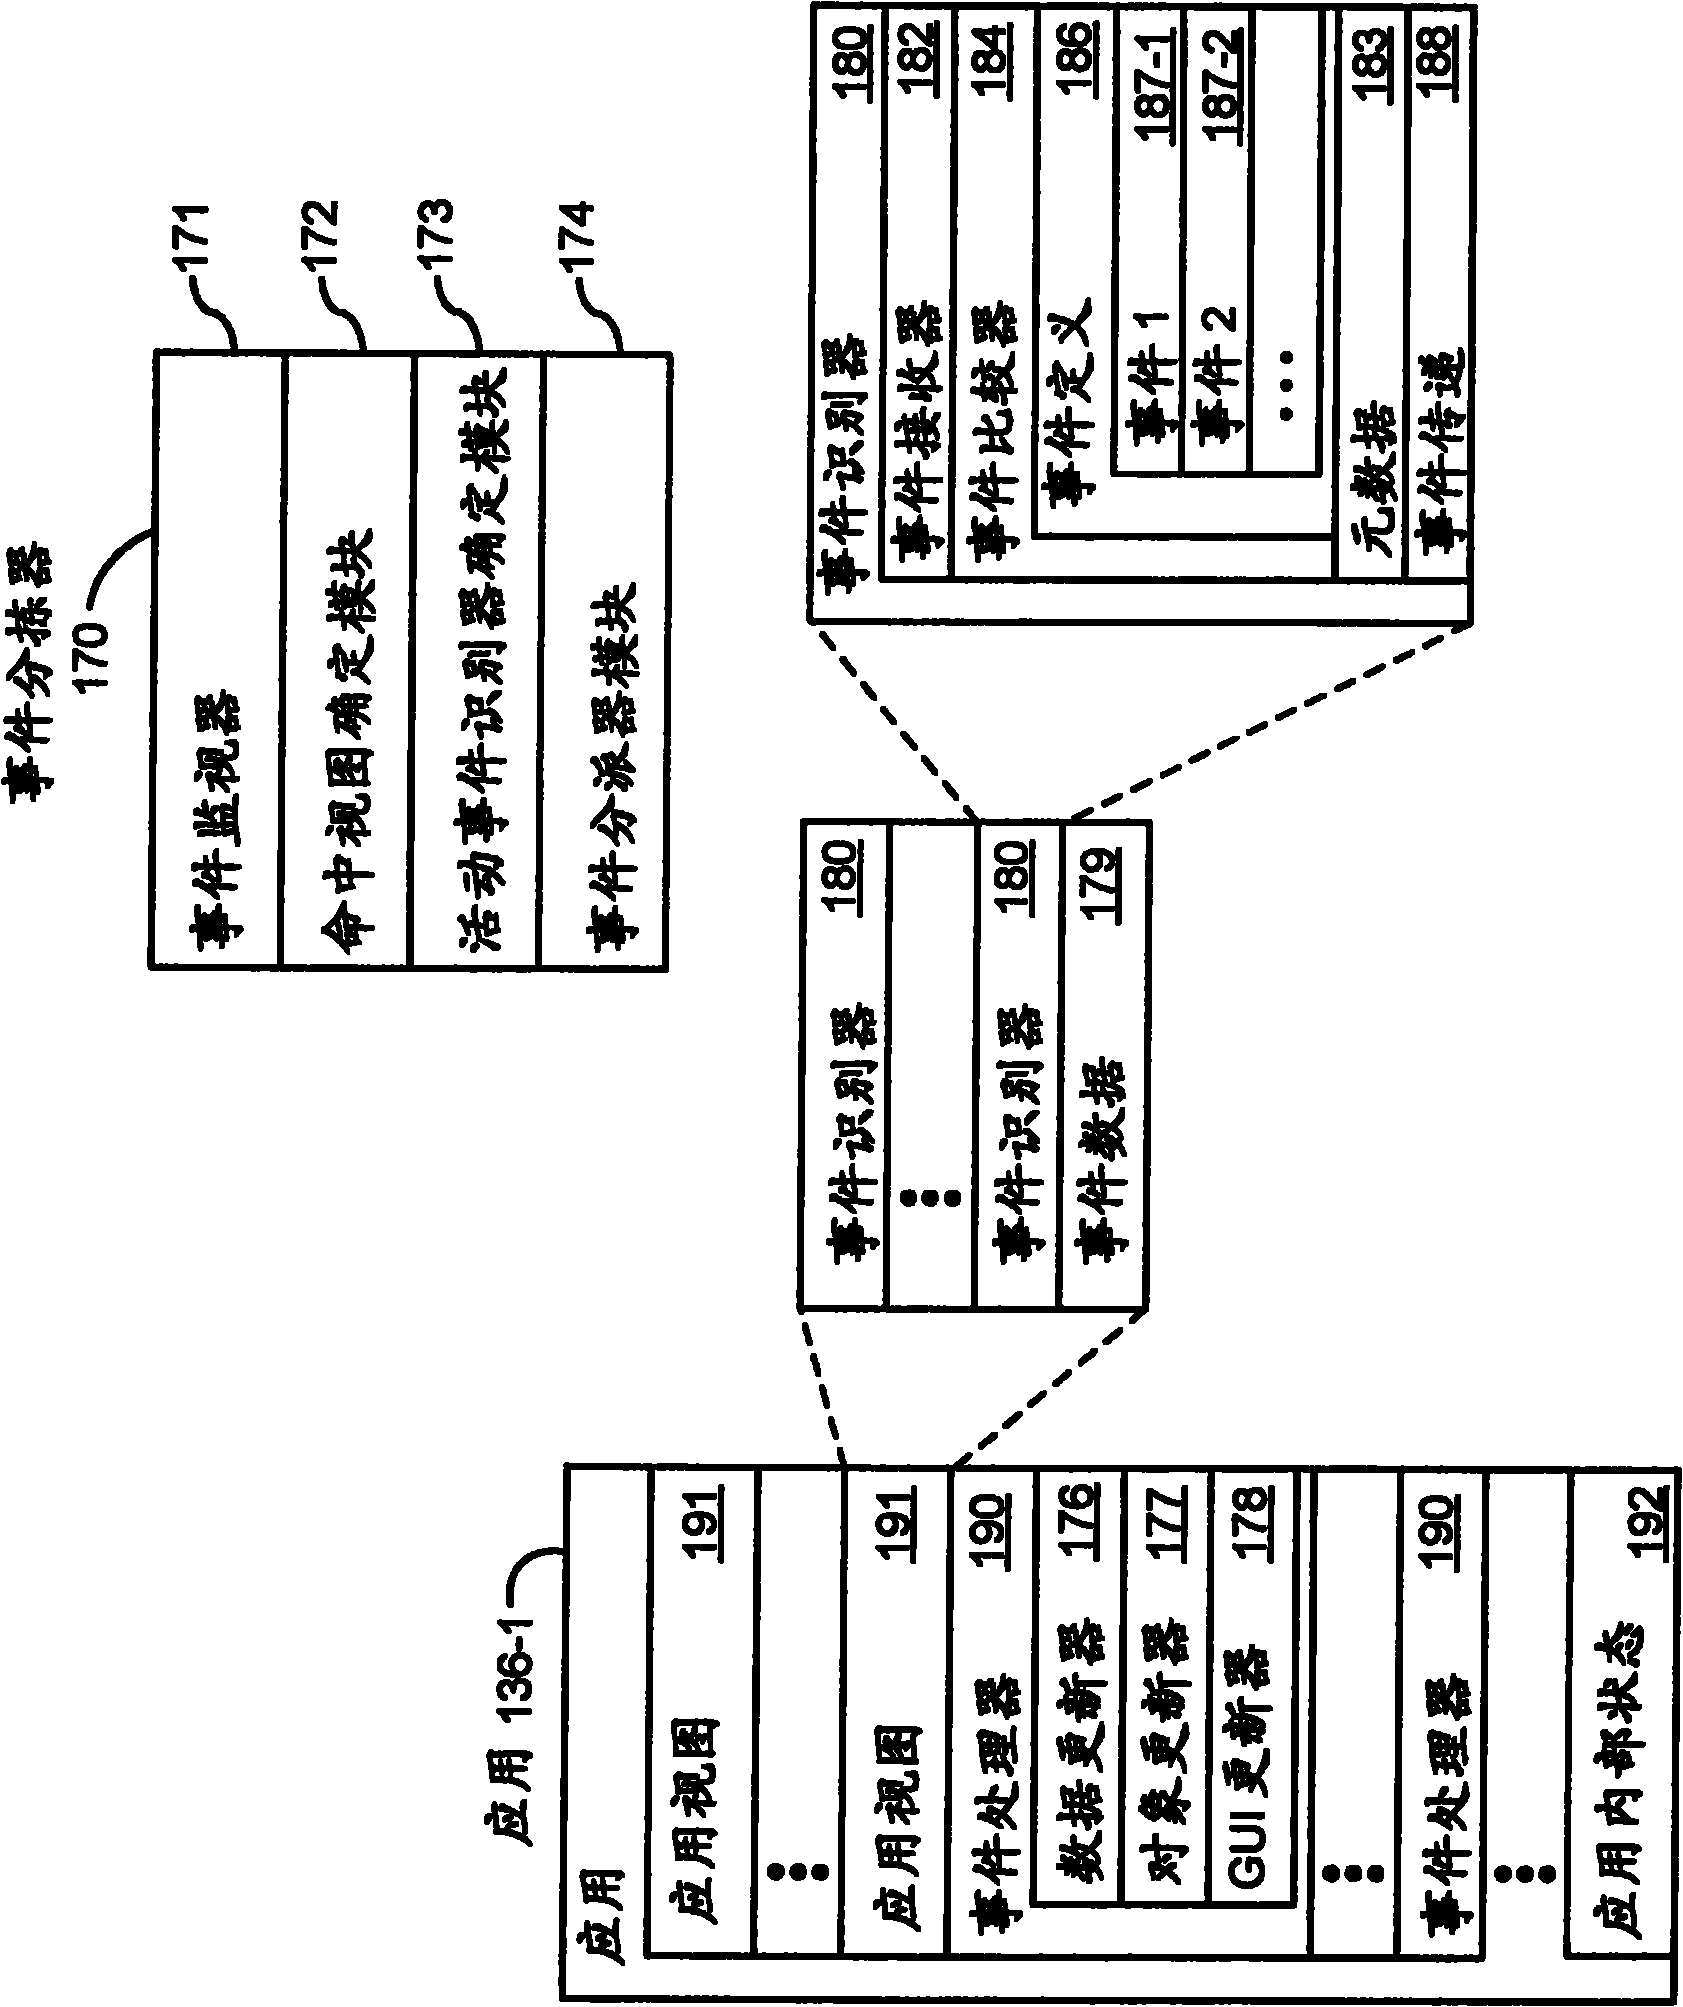 Method for managing file folder and related equipment